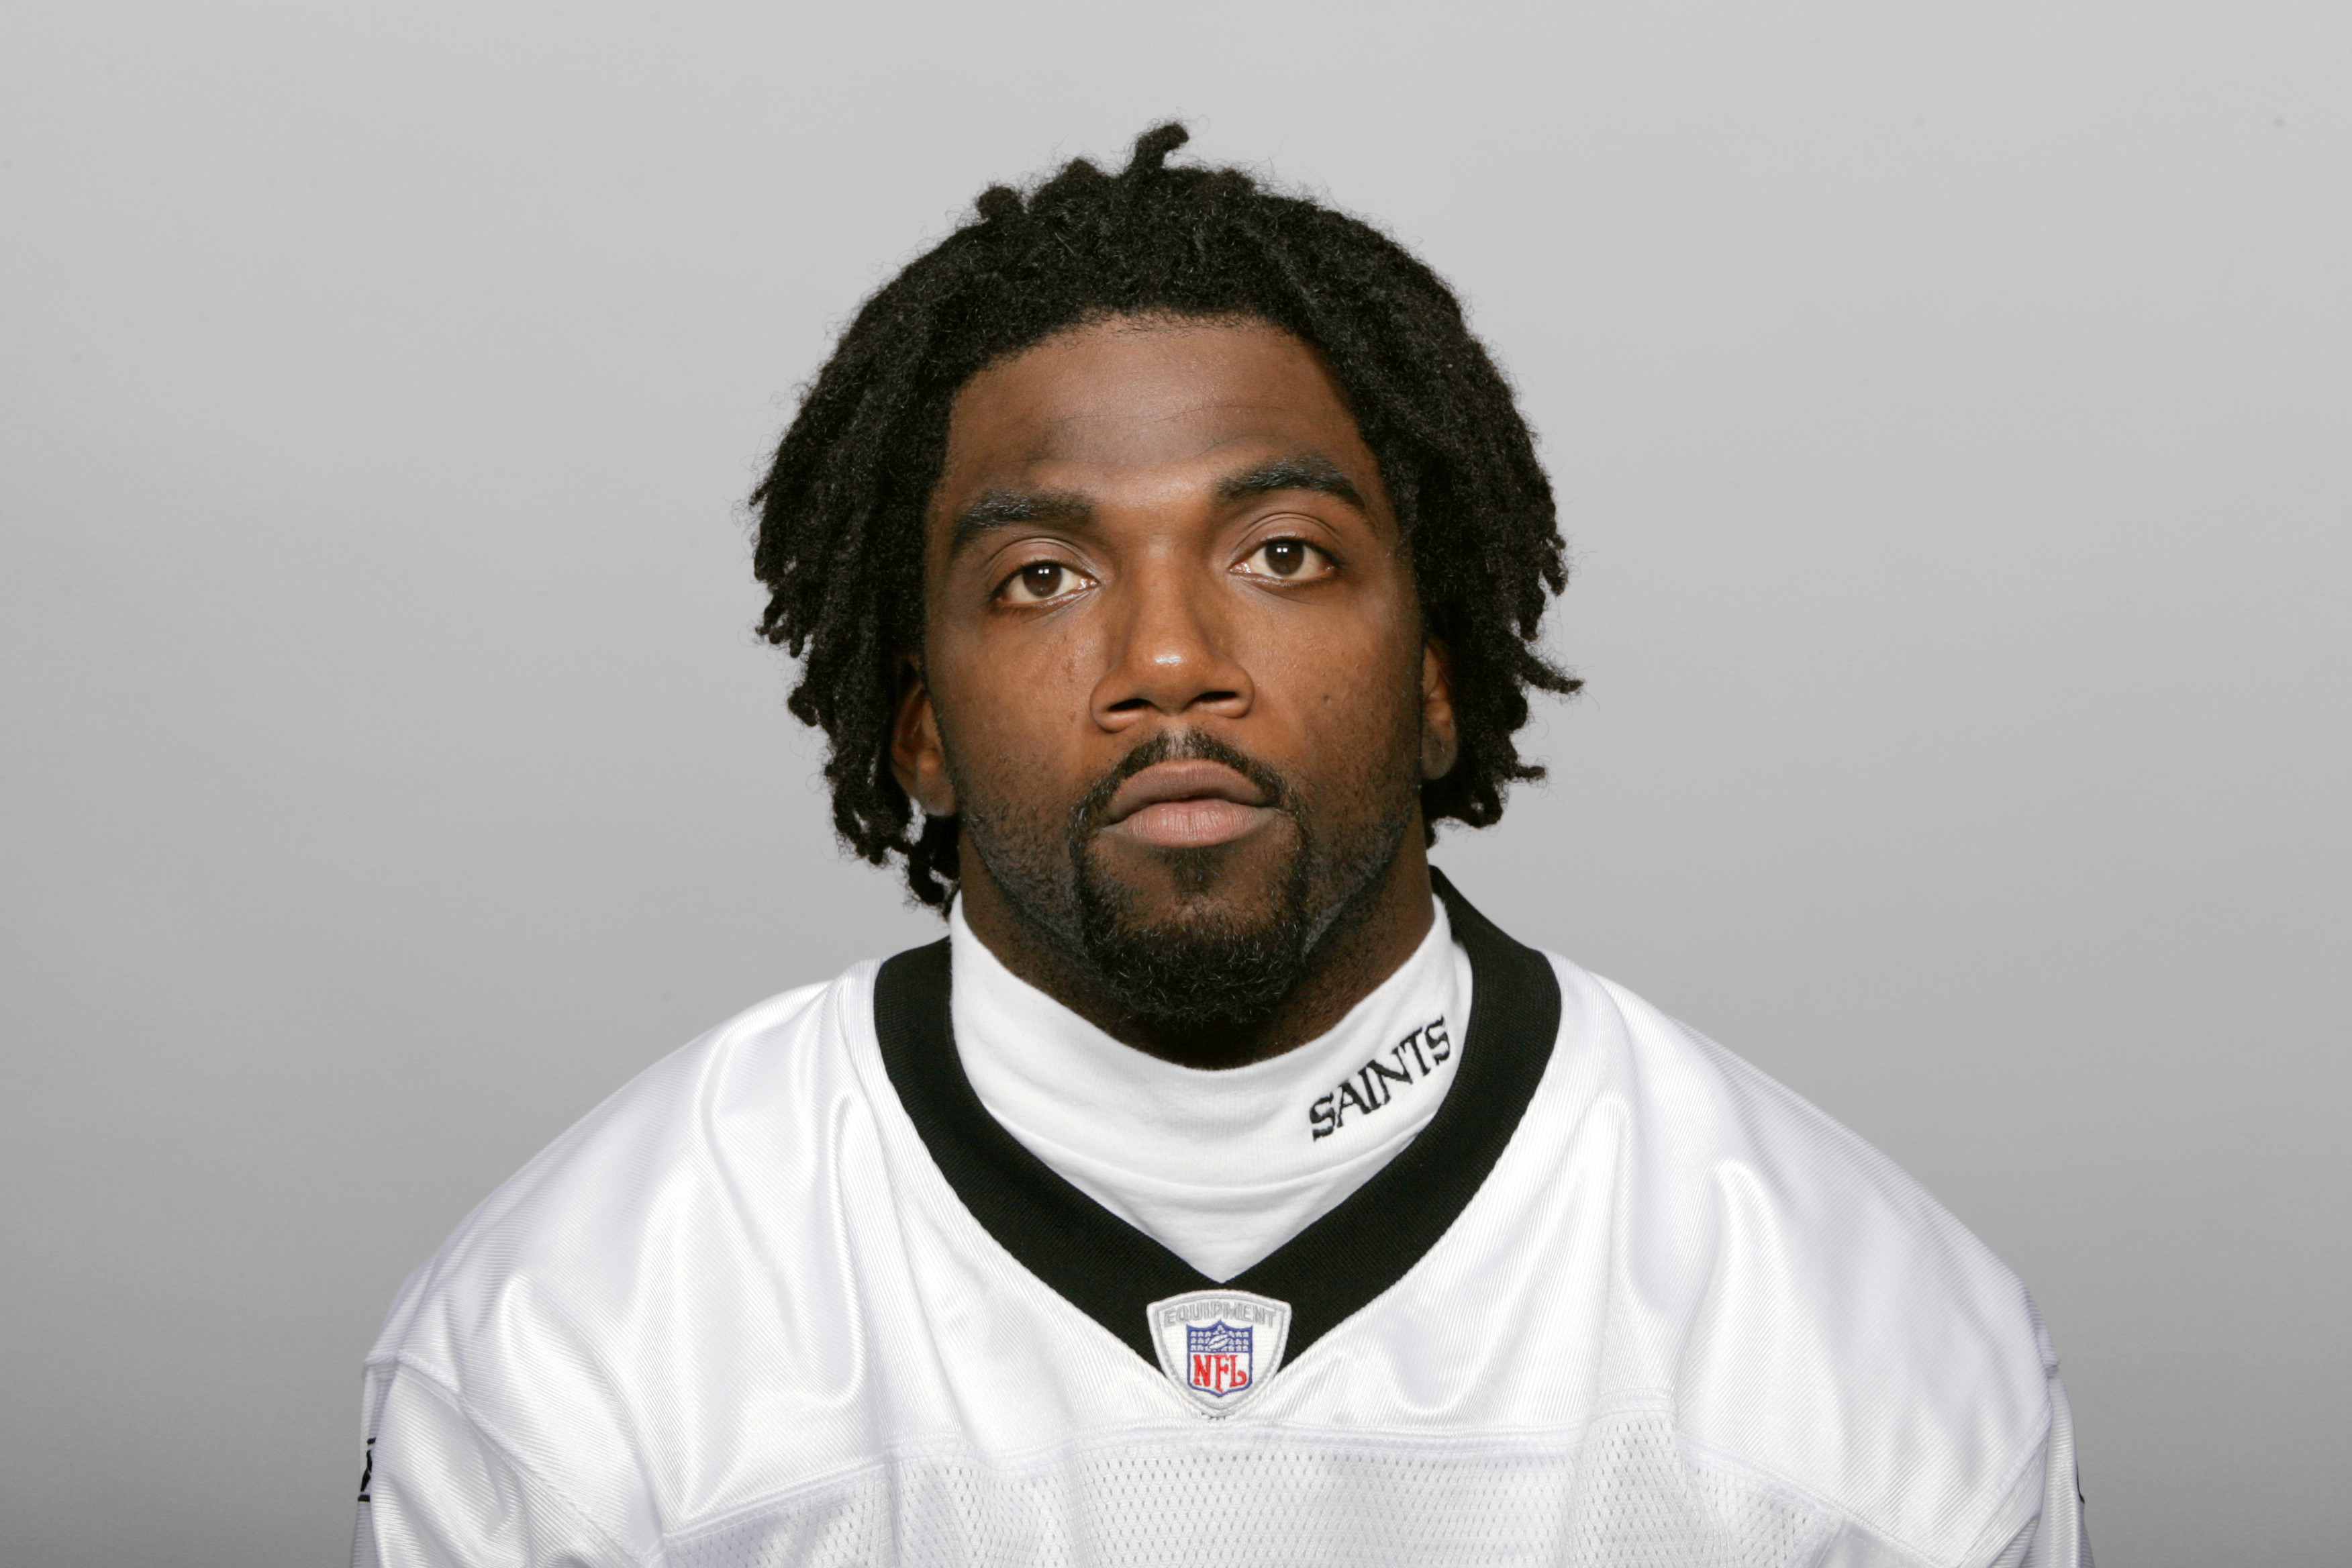 The NFL's Donté Stallworth on what it's like to manage millions as an athlete